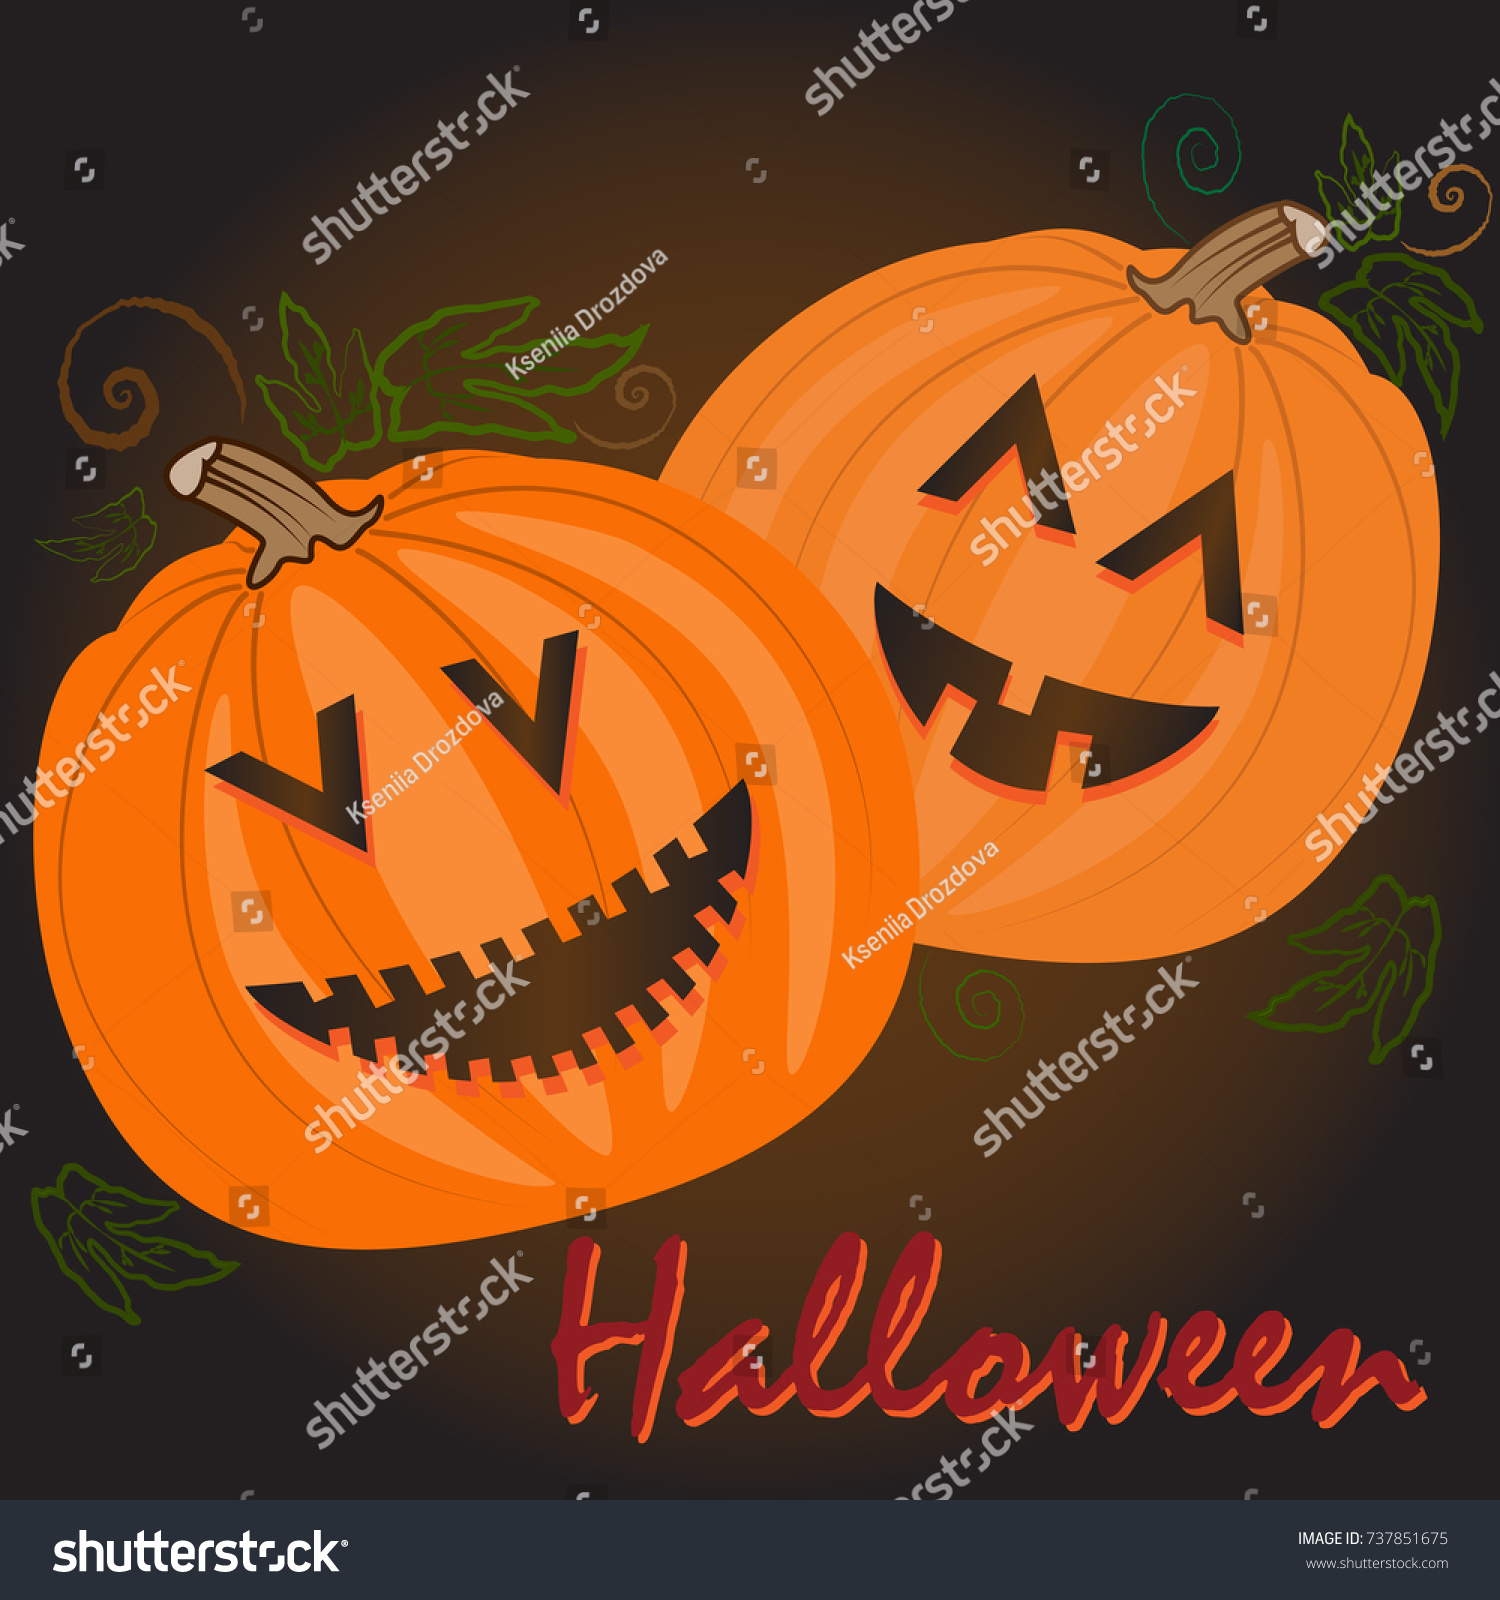 SVG of Halloween pumpkin faces in dark and text svg